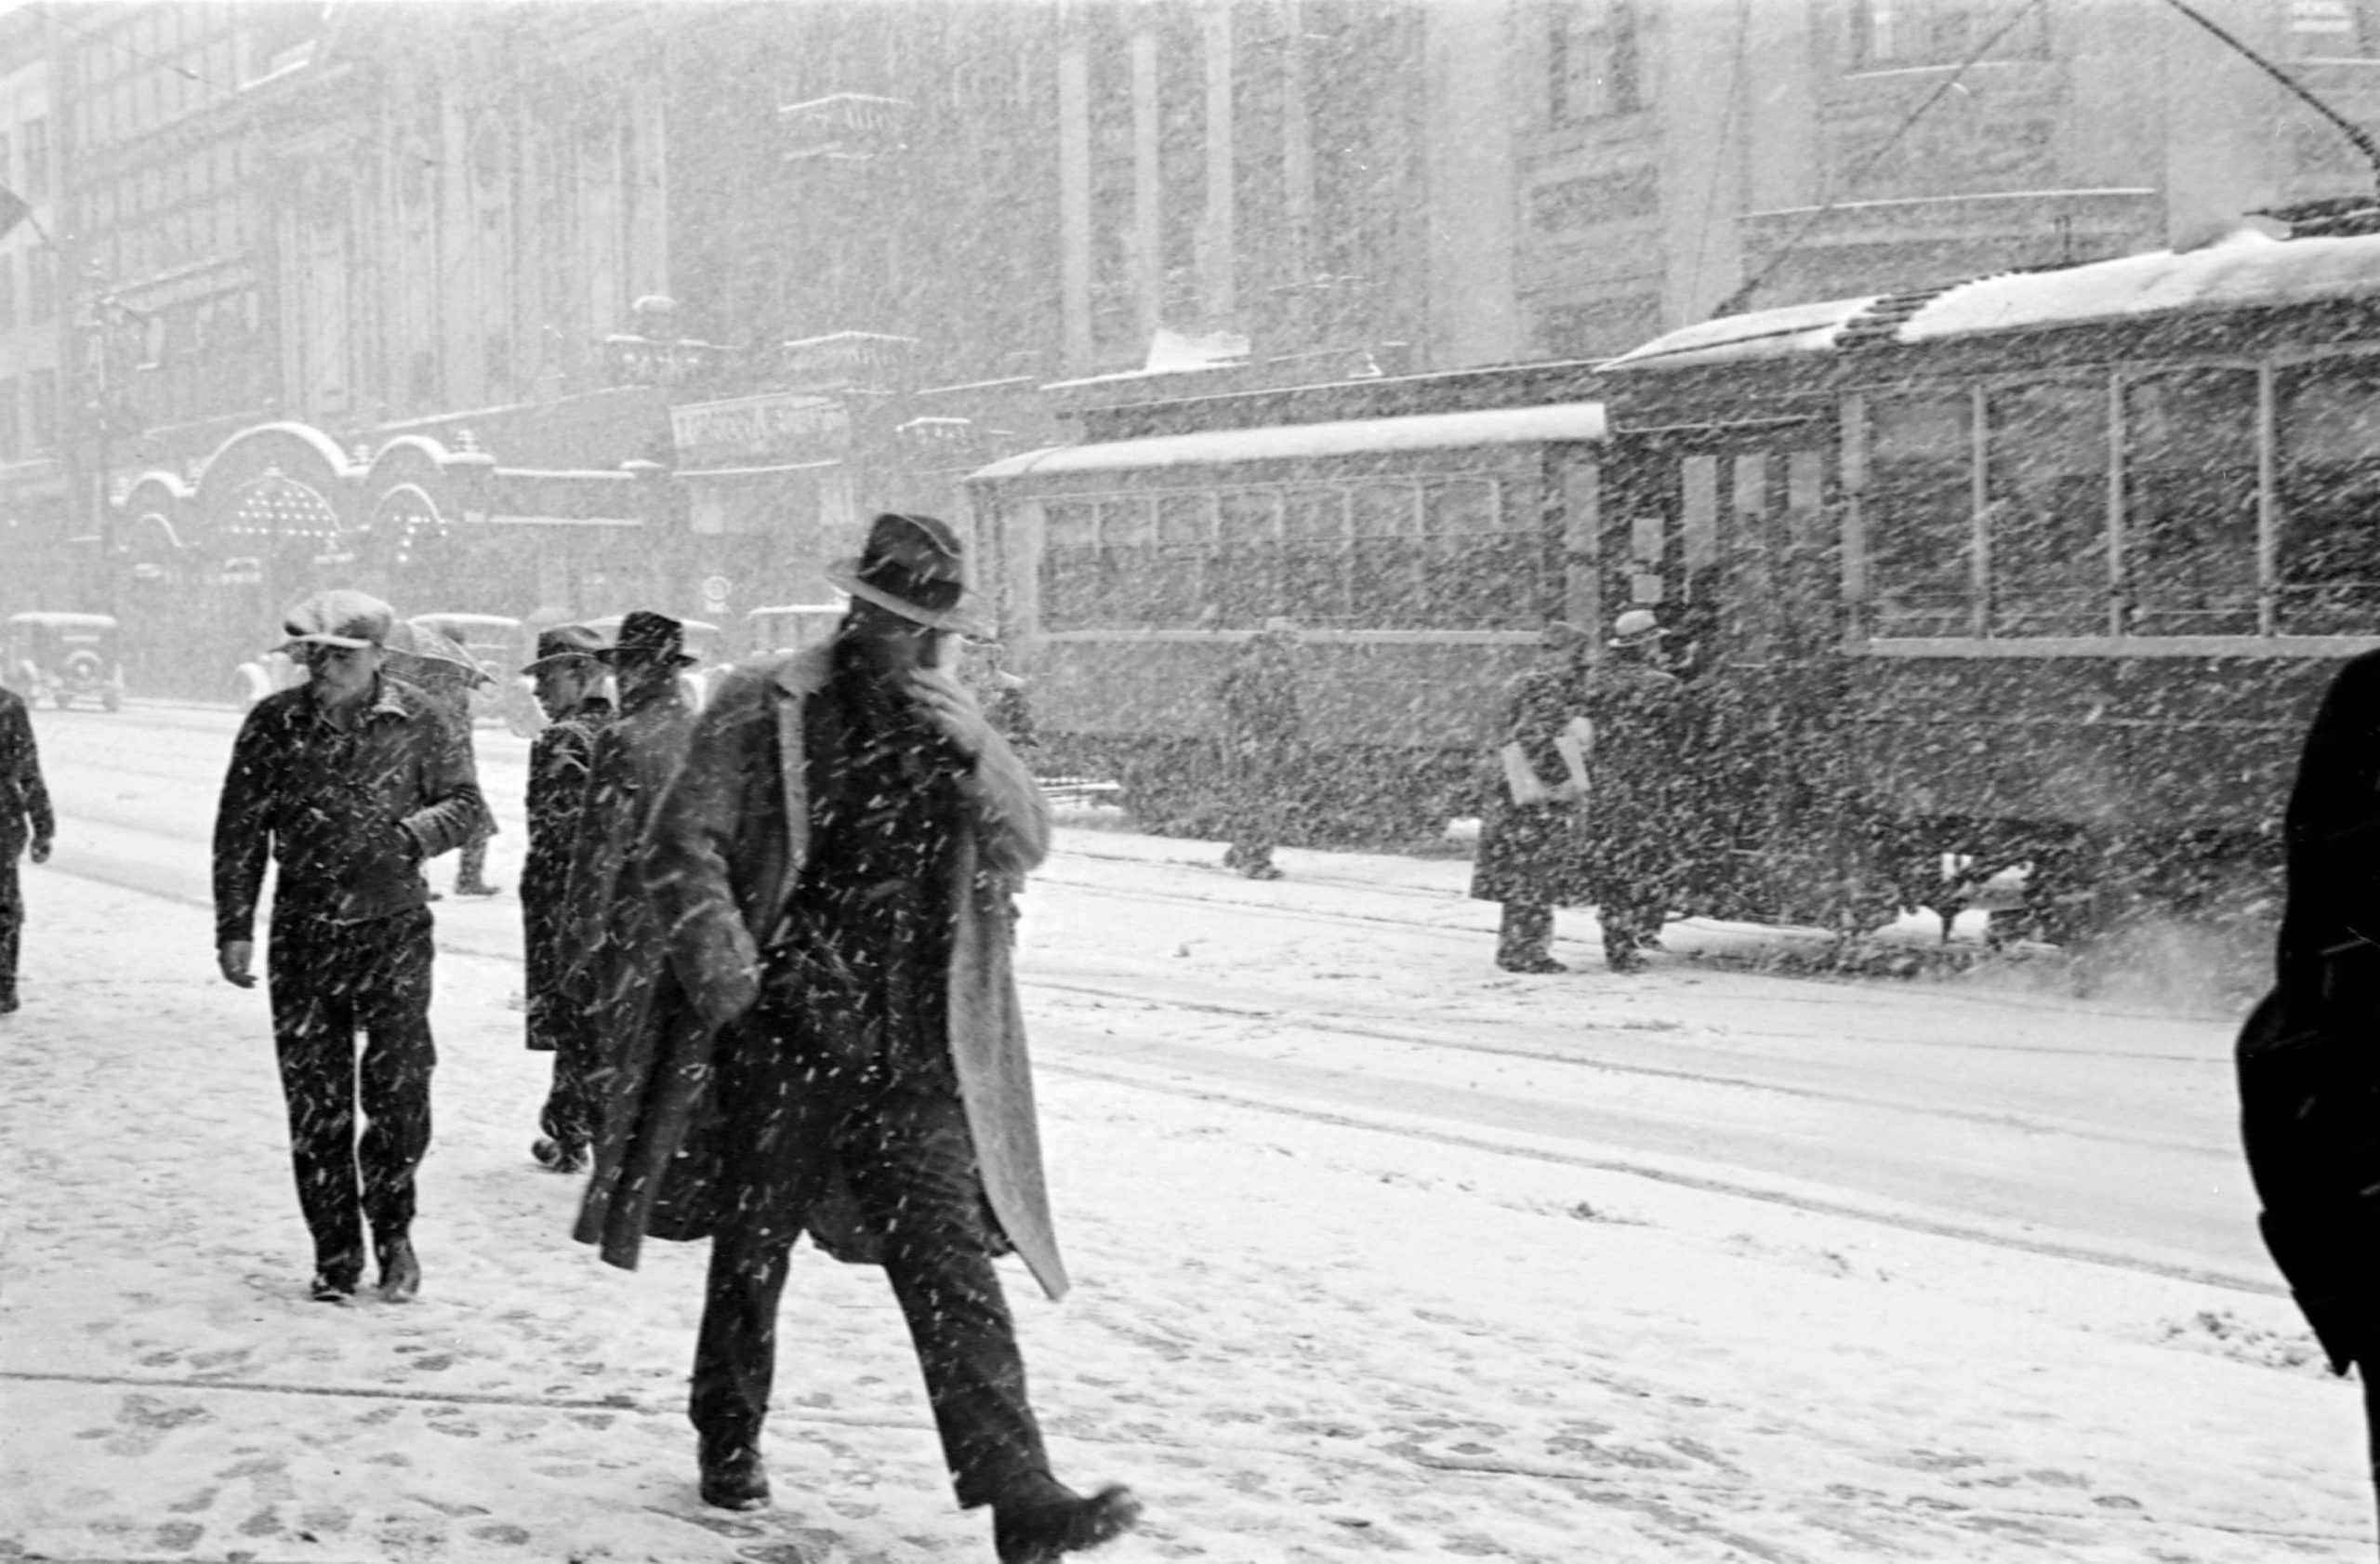 1937 - Hastings Street in a snow storm